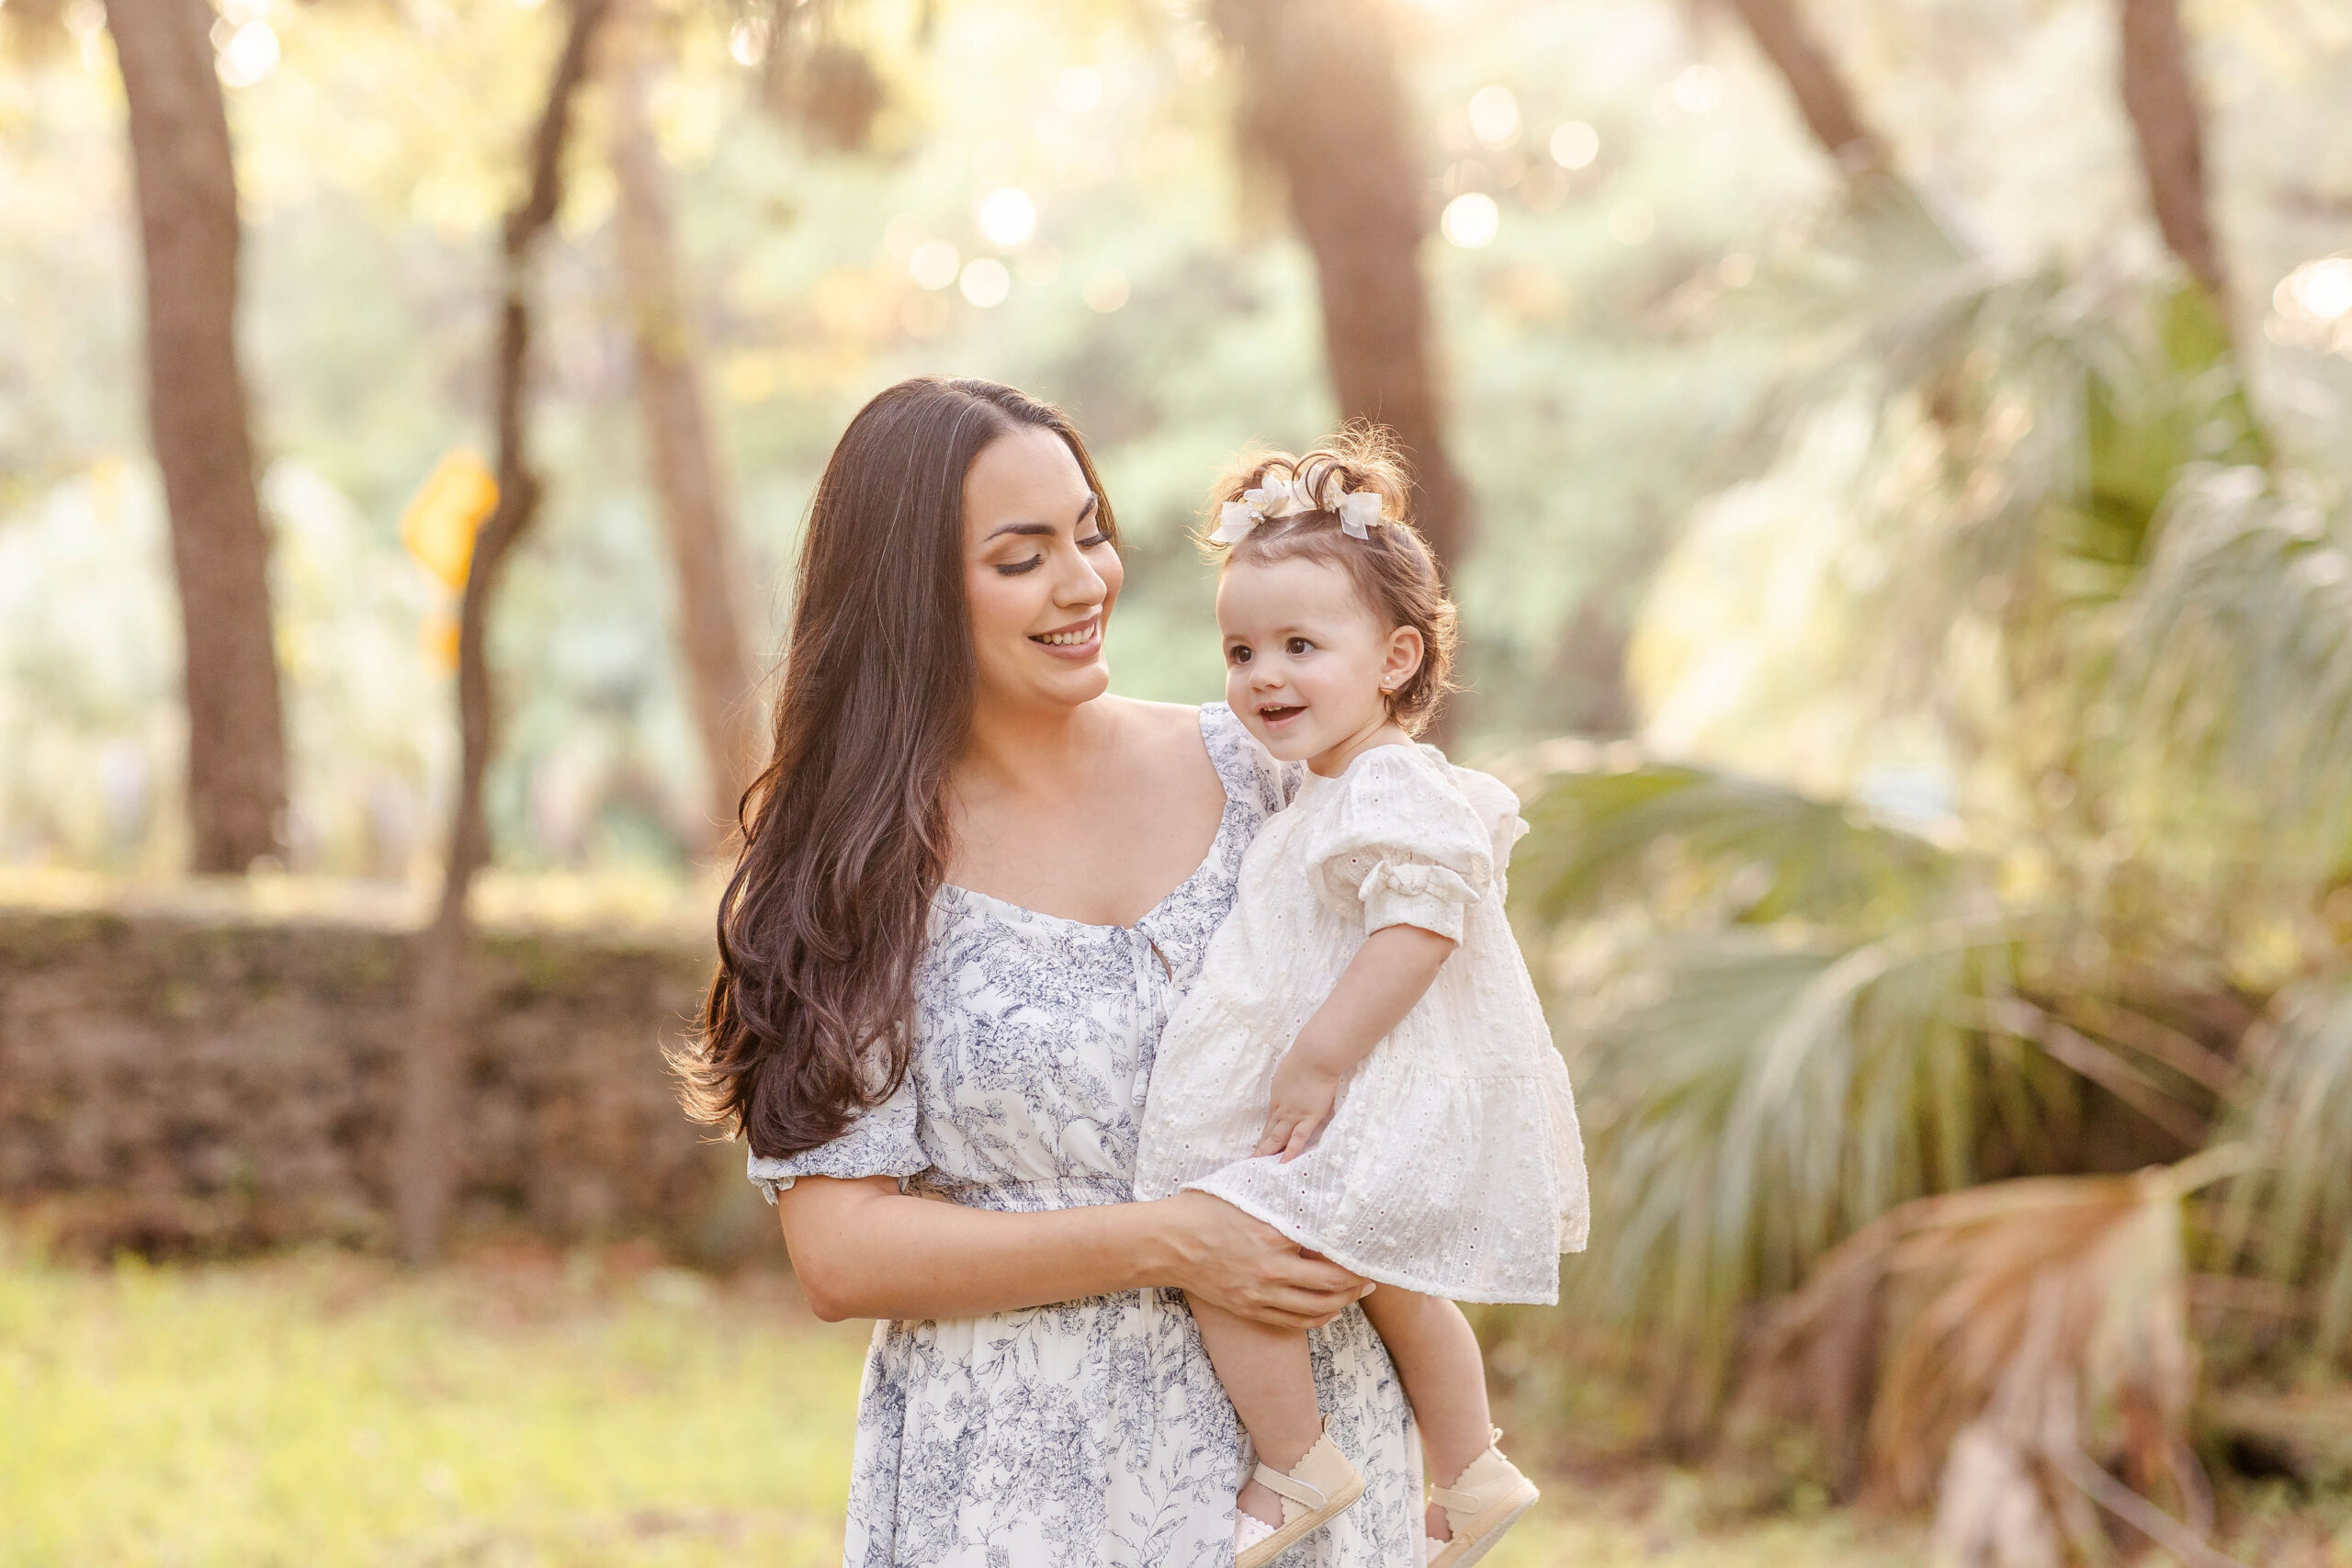 A mother in a floral print dress stands in a park at sunset holding her happy toddler daughter in a white dress